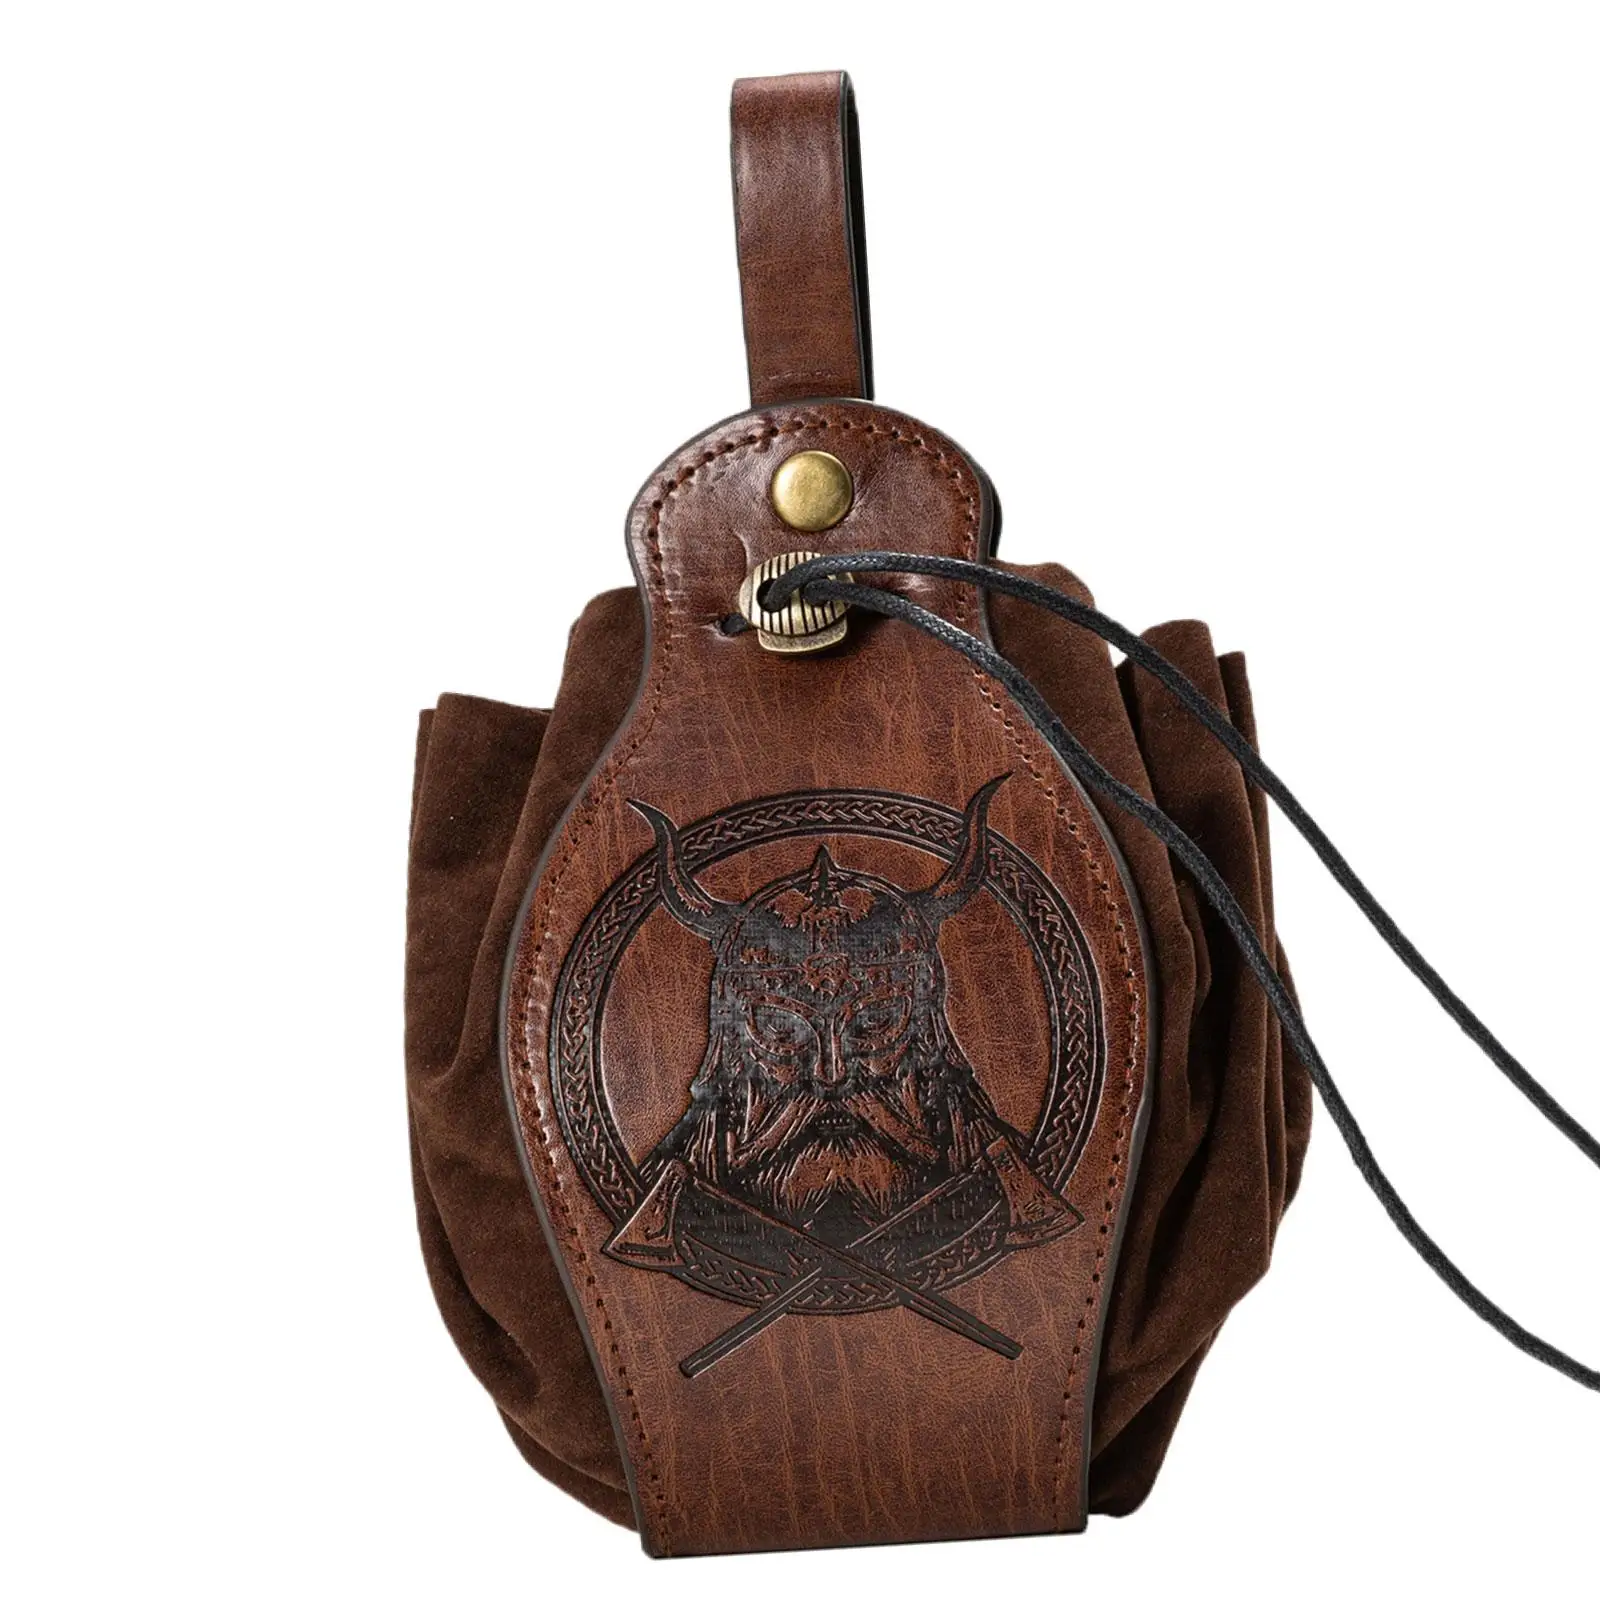 Medieval Drawstring Pouch PU Leather Bum Bags Casual Dice Bag Waist Bag Fanny Pack for Walking Halloween Cosplay Outdoor Sports